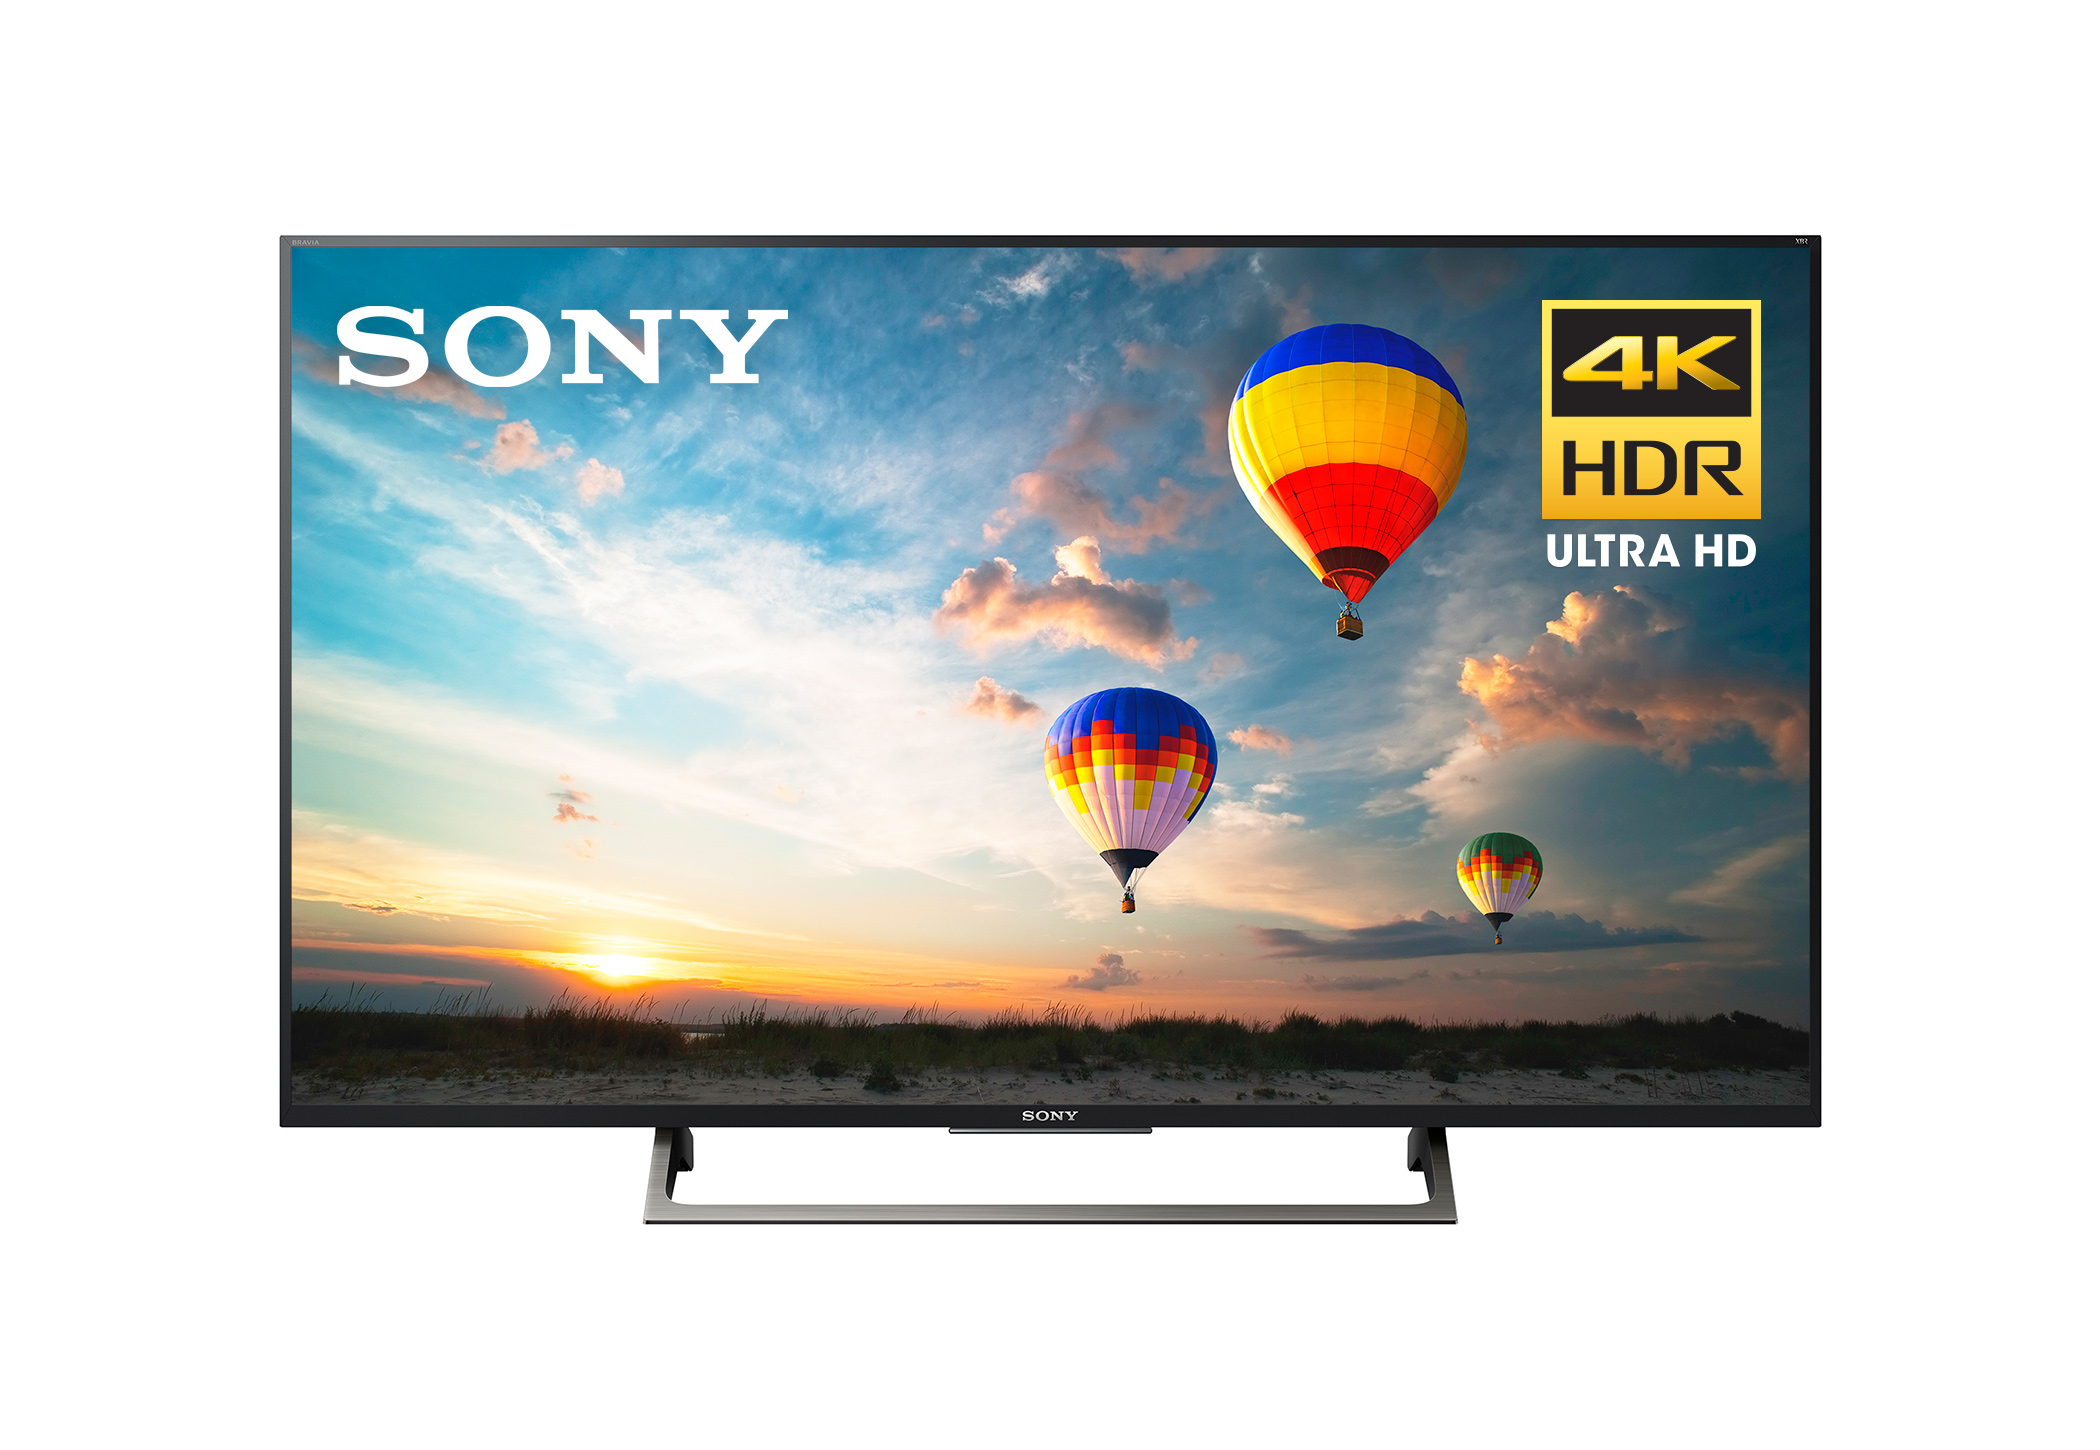 Sony 43" Class 4K UHD LED Android Smart TV HDR BRAVIA 800E Series XBR43X800E - image 1 of 14